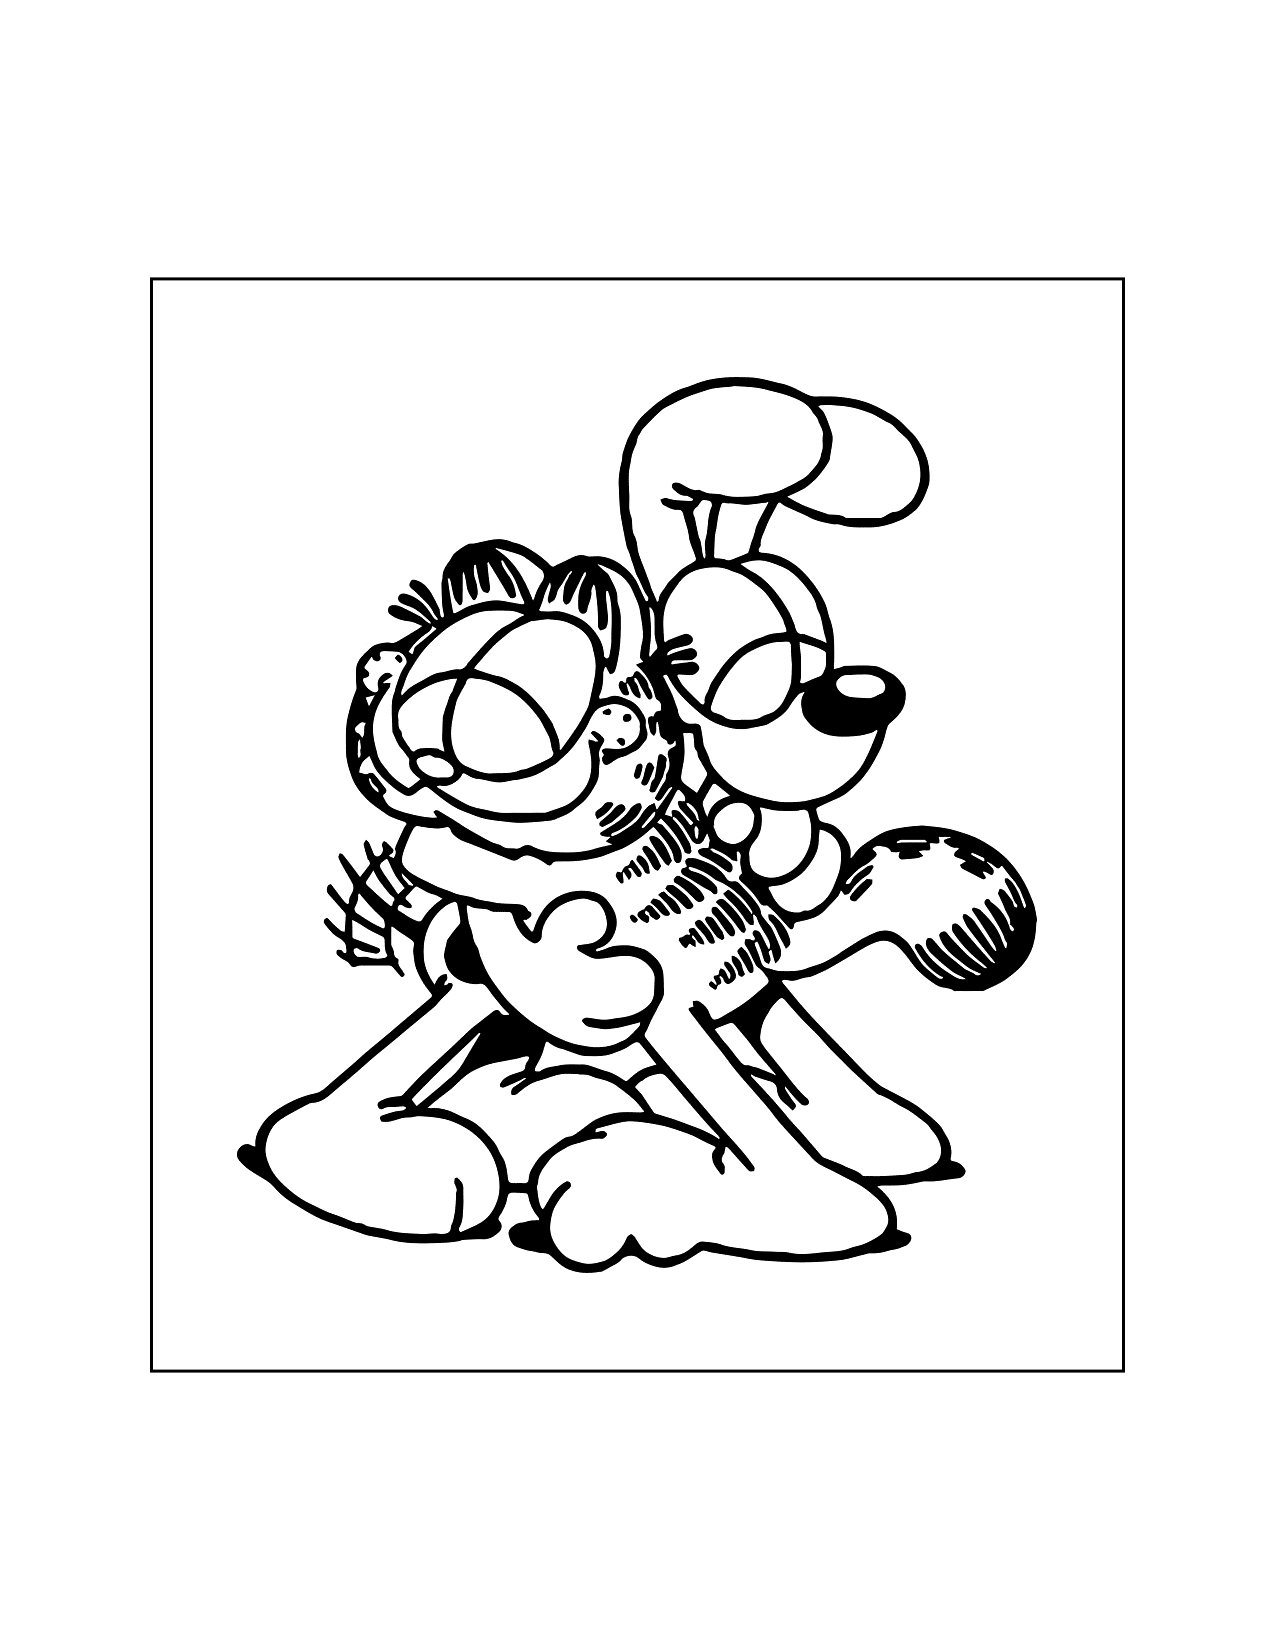 Garfield And Odie Hugging Coloring Page